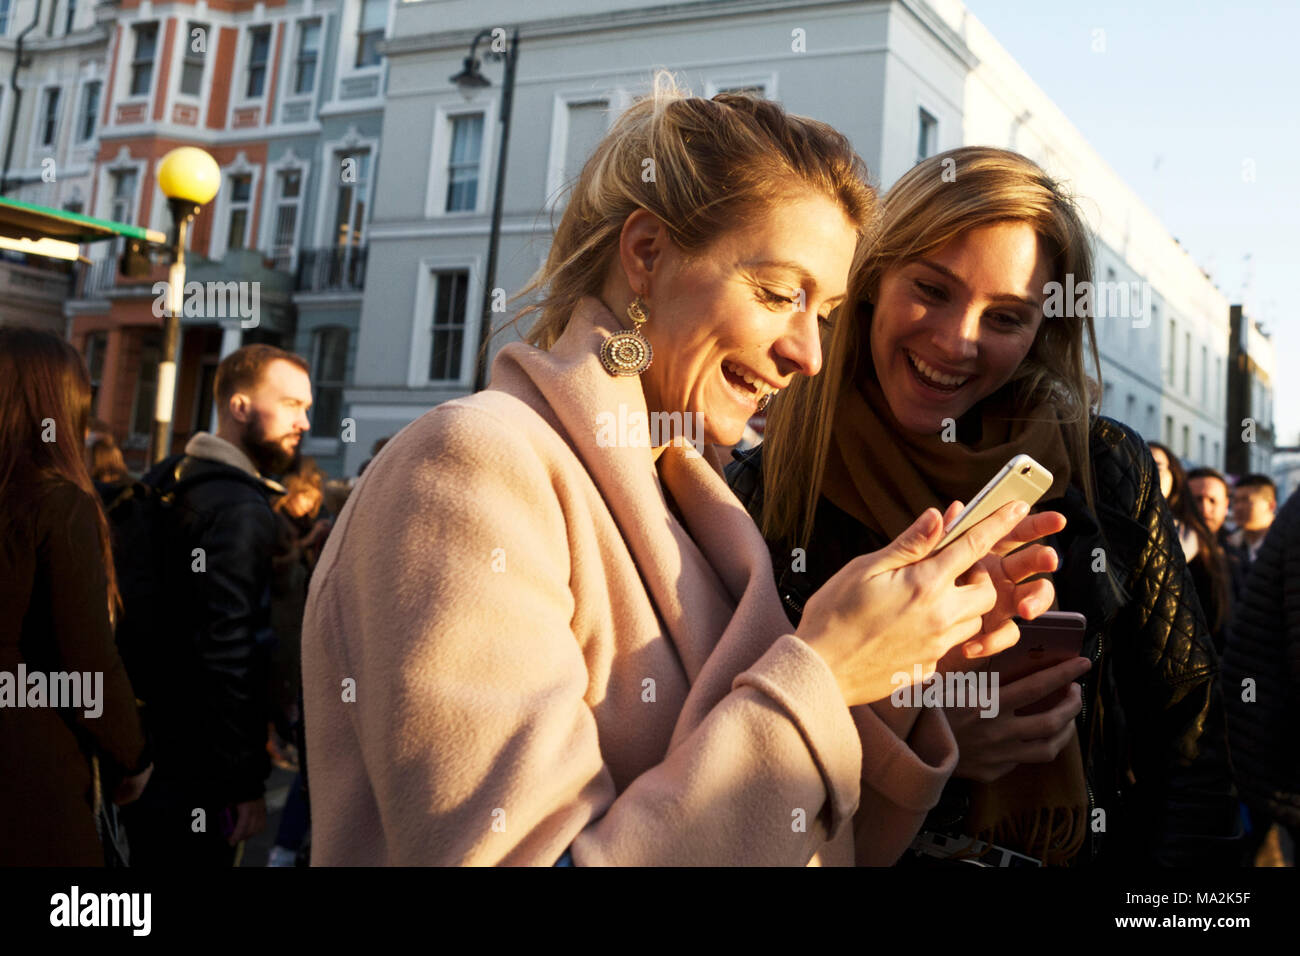 Young female adults smiling with emotion, looking at mobile phone smart phone. Communication. Millennials expressing emotion. People happy street. Stock Photo